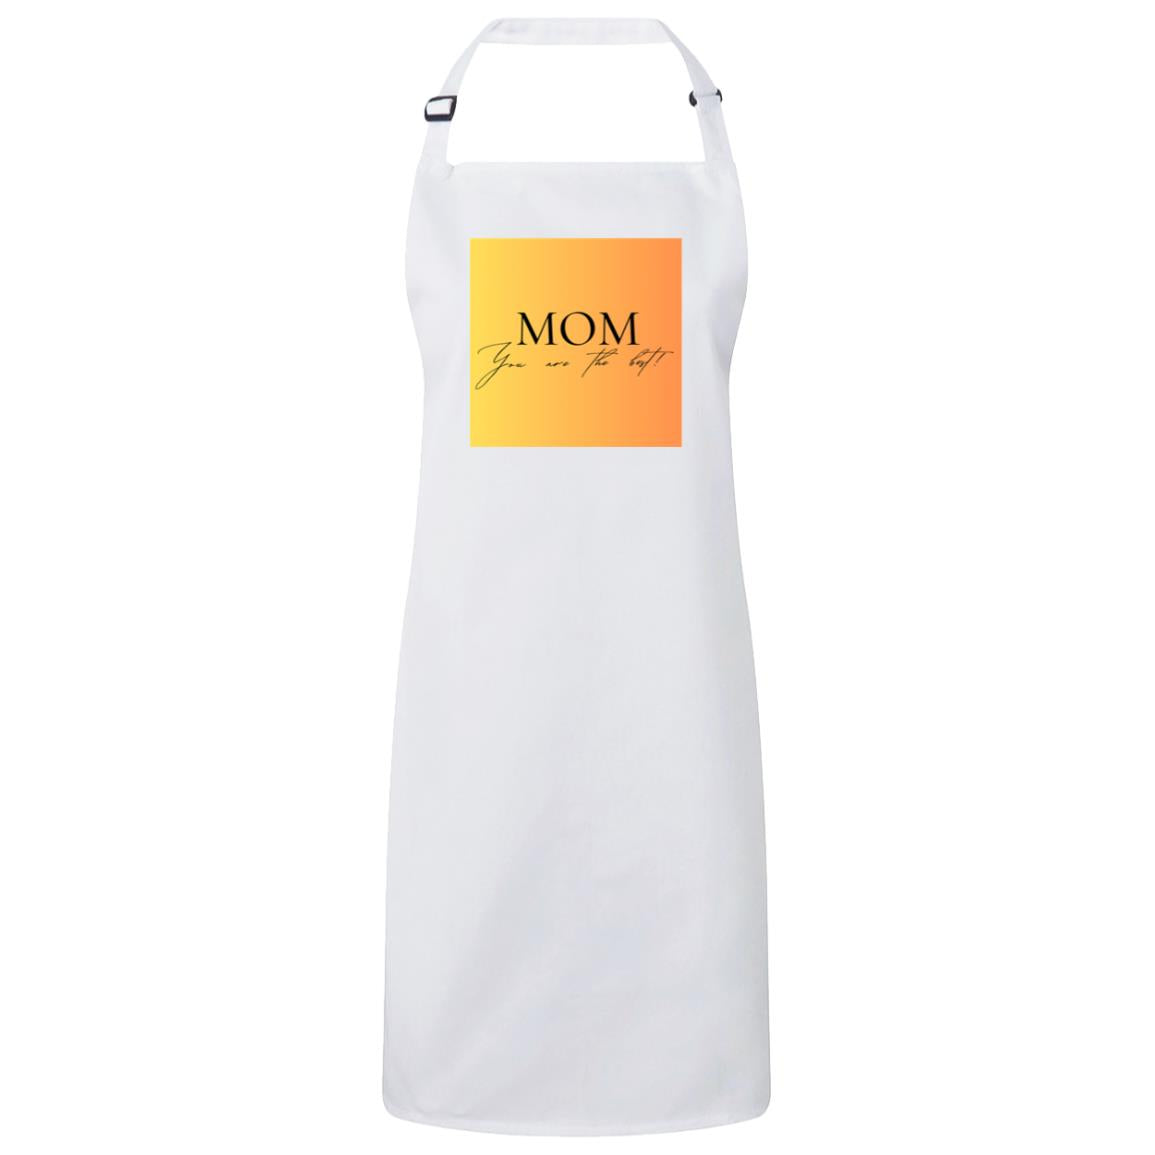 Mom You Are The Best -Sustainable Unisex Bib Apron